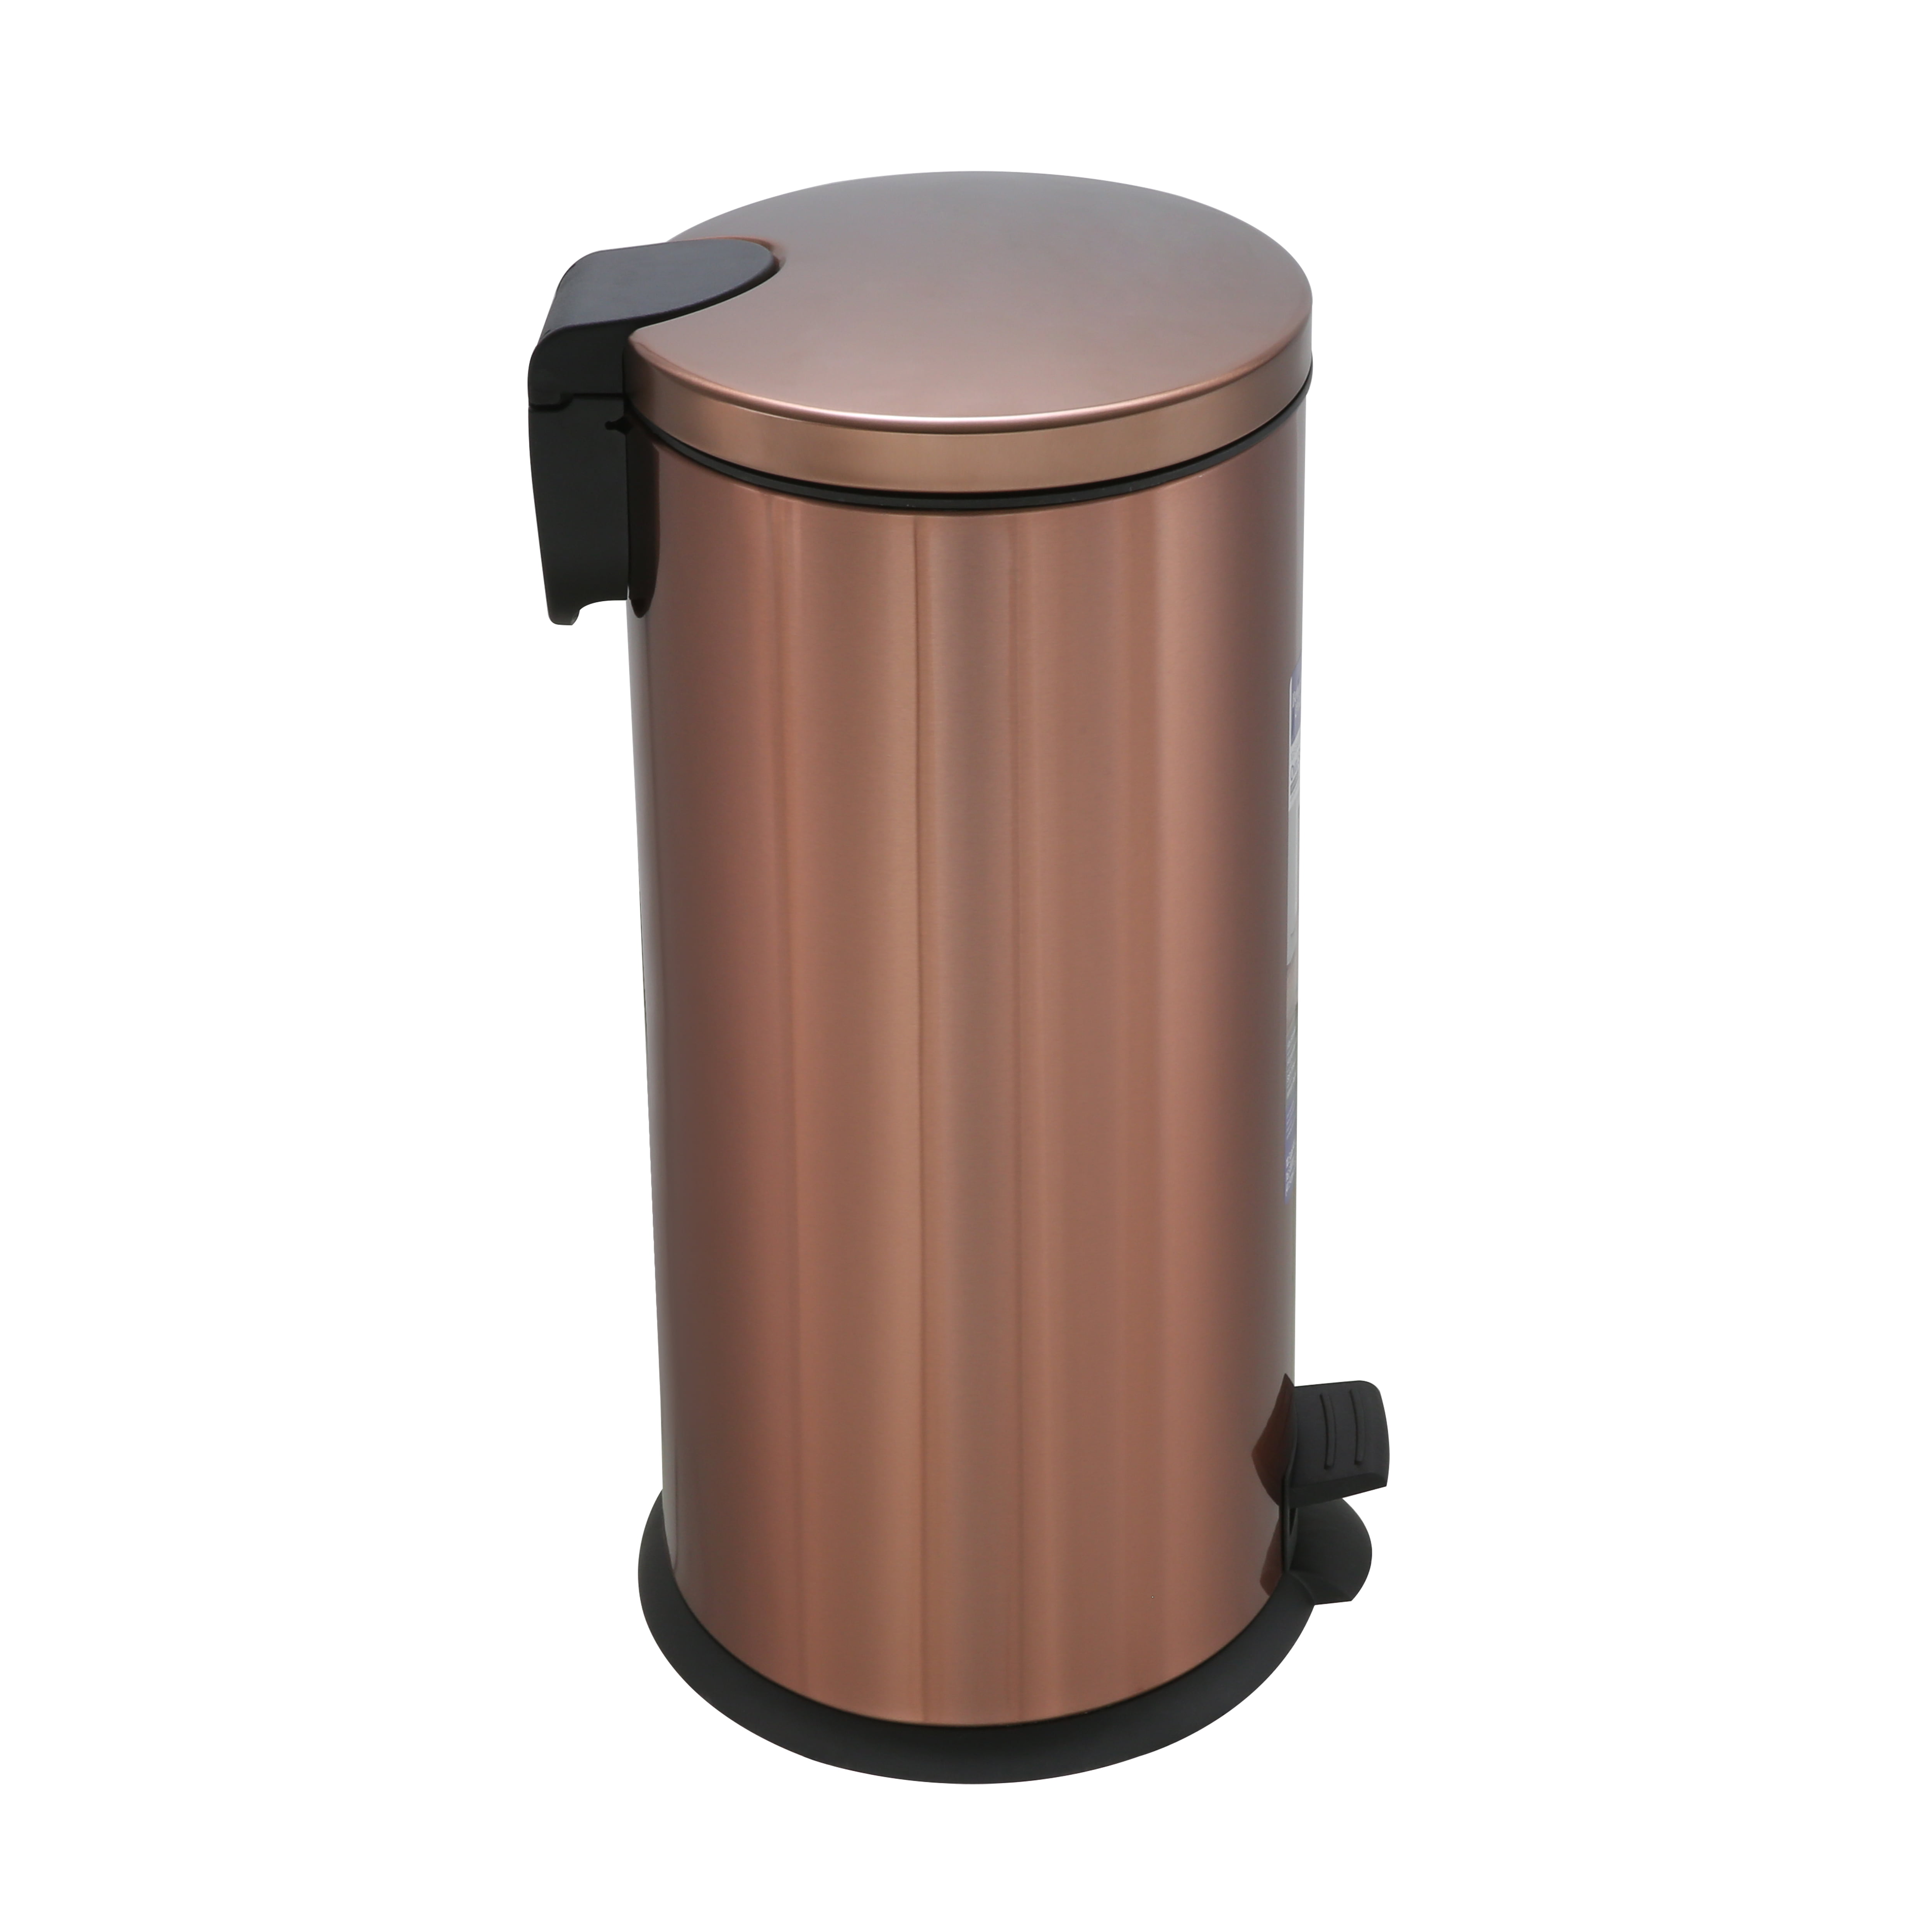 Better Homes Garden Trash Waste Can 10.5 Gal Oval Copper. 